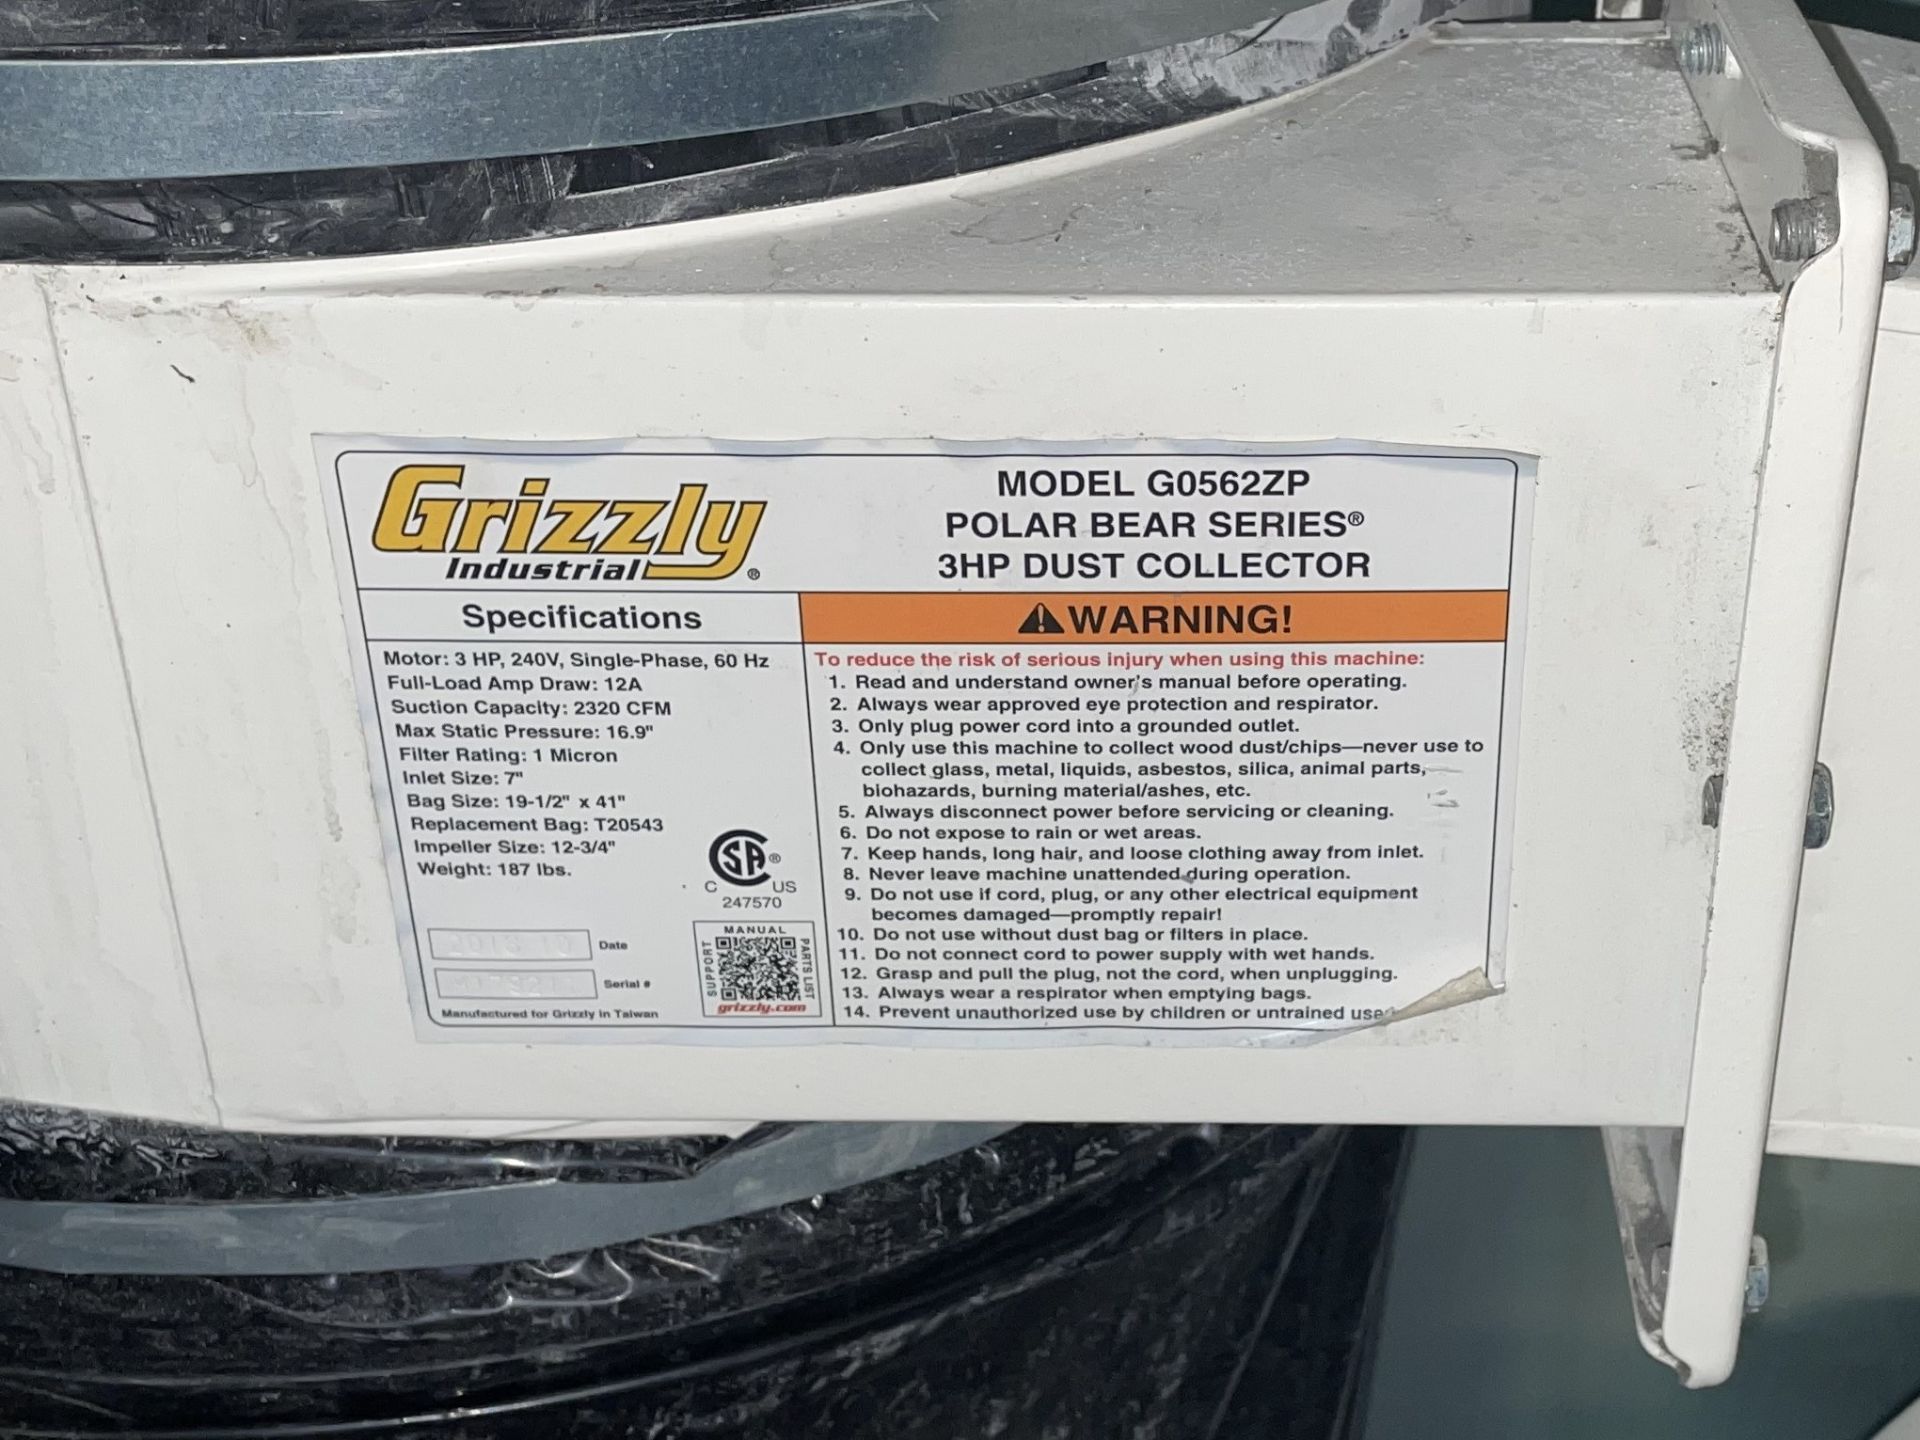 2018 - Grizzly Mdl. G0562ZP Polar Bear Series Dust Collector - Image 4 of 4